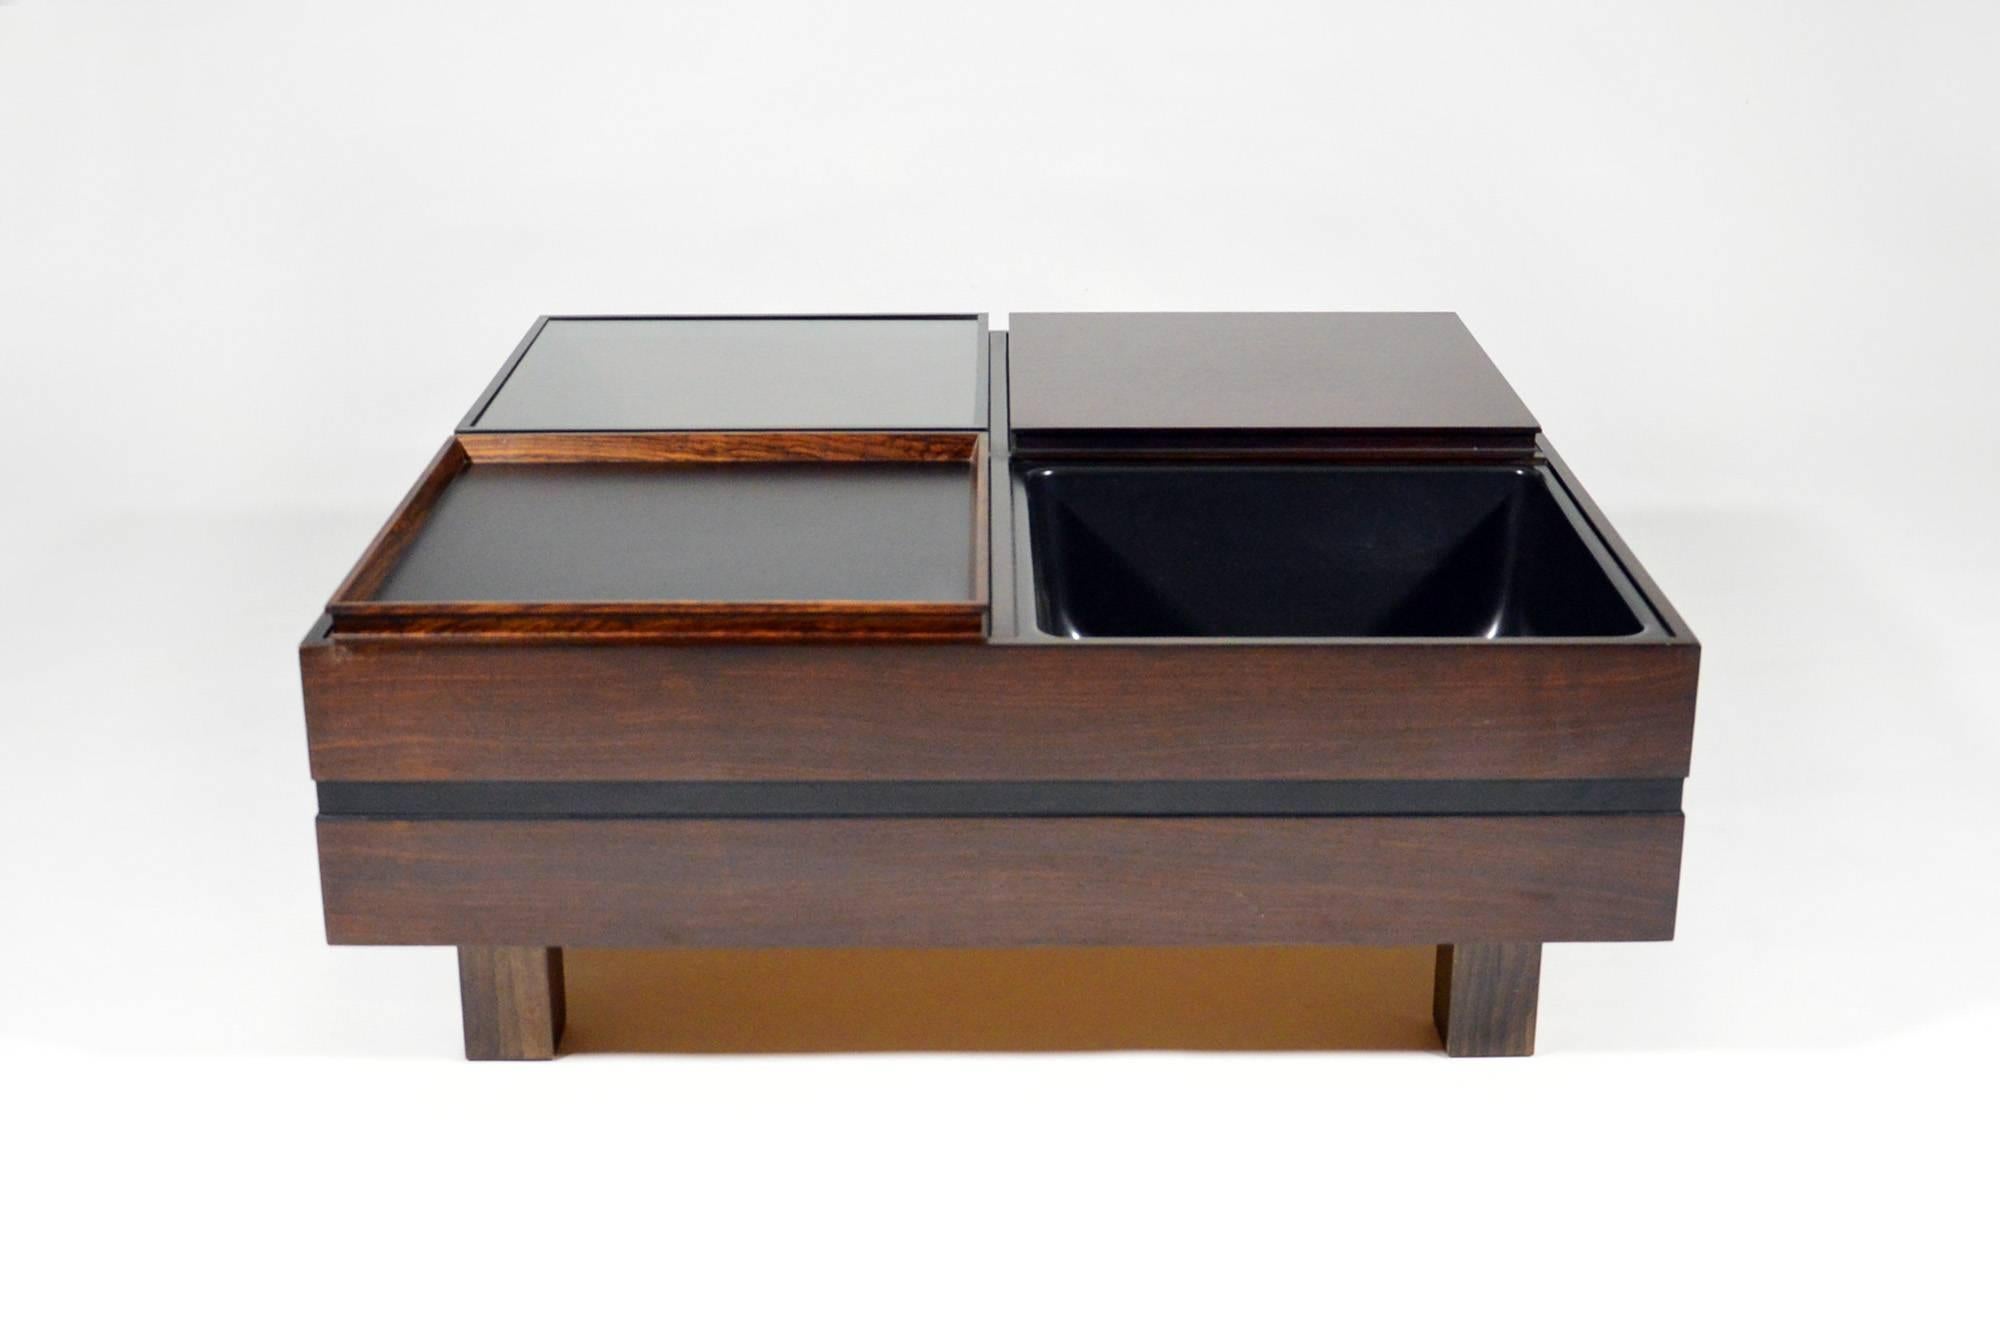 Modular coffe table produced by Sormani in 1960s.
The table is divided into four compartments:
- One empty, it can be used as a magazine rack;
- One with a plastic tray, which can be used as a bar or cache-pot;
- One with a removable tray, to